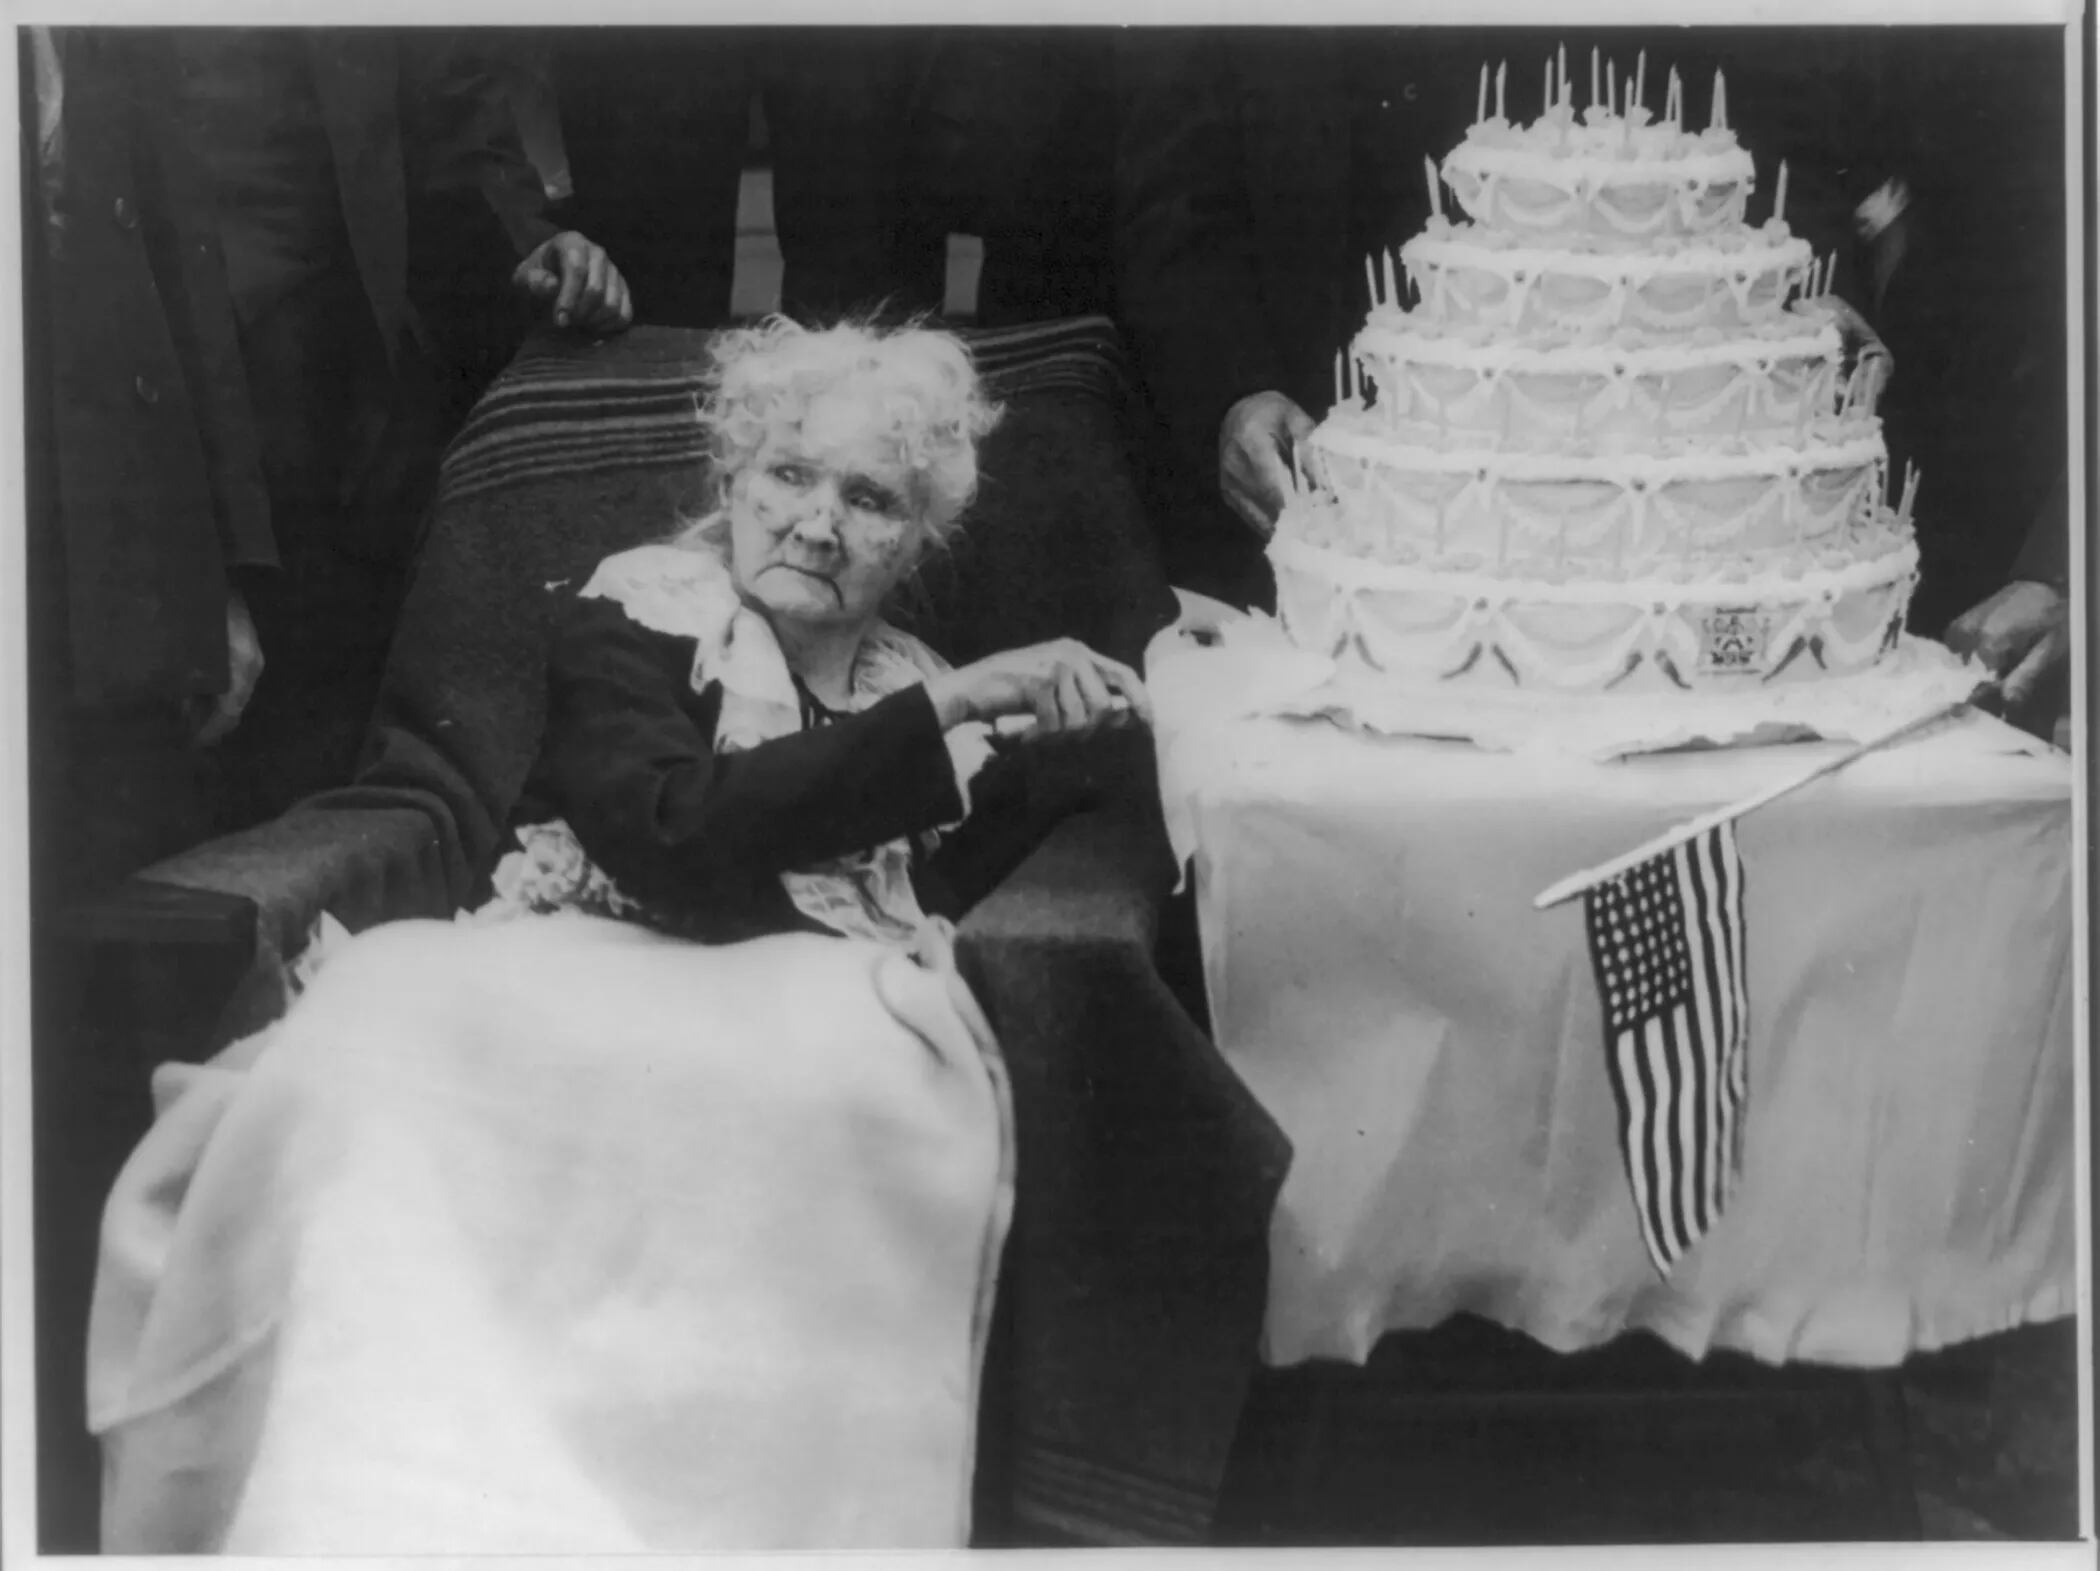 Mary "Mother" (Harris) Jones, 1830-1930, half-length portrait, seated, facing left, about to cut a large birthday cake on her hundredth birthday anniversary in May 1930.